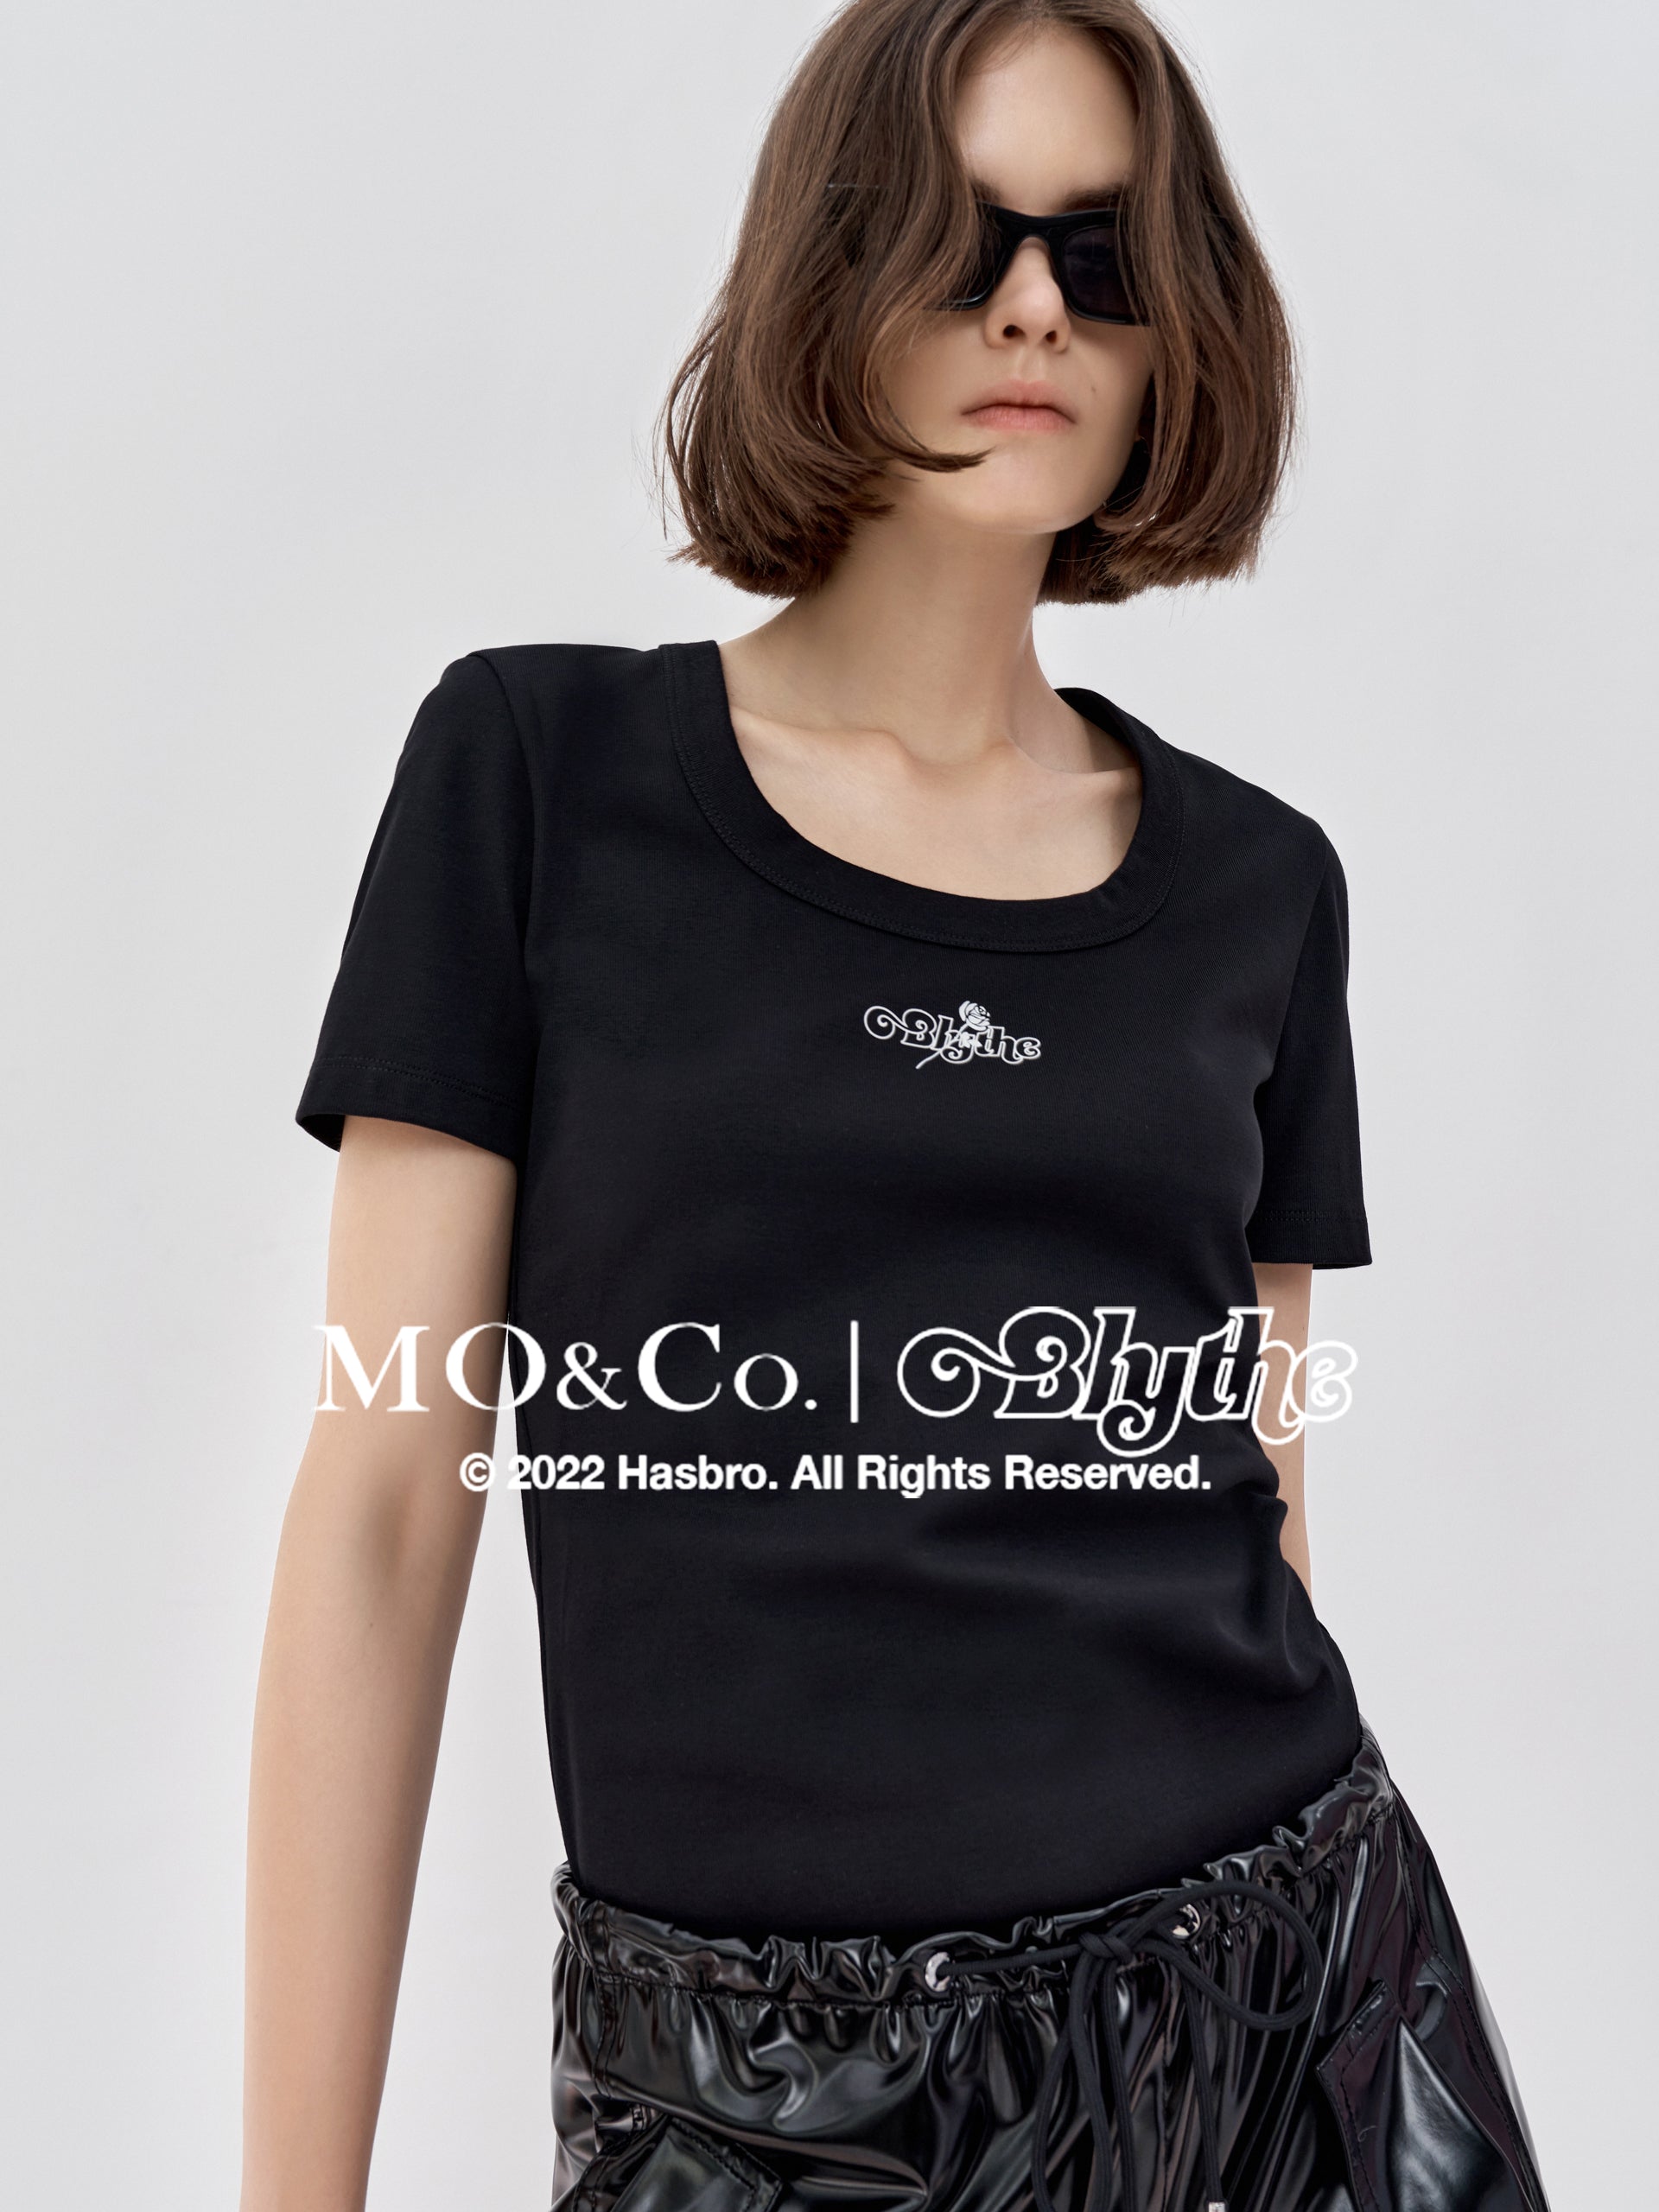 MO&Co.｜Blythe Collaboration Rose Print Crew Neck T-Shirt Fitted Casual Round Neck  Black Tshirts